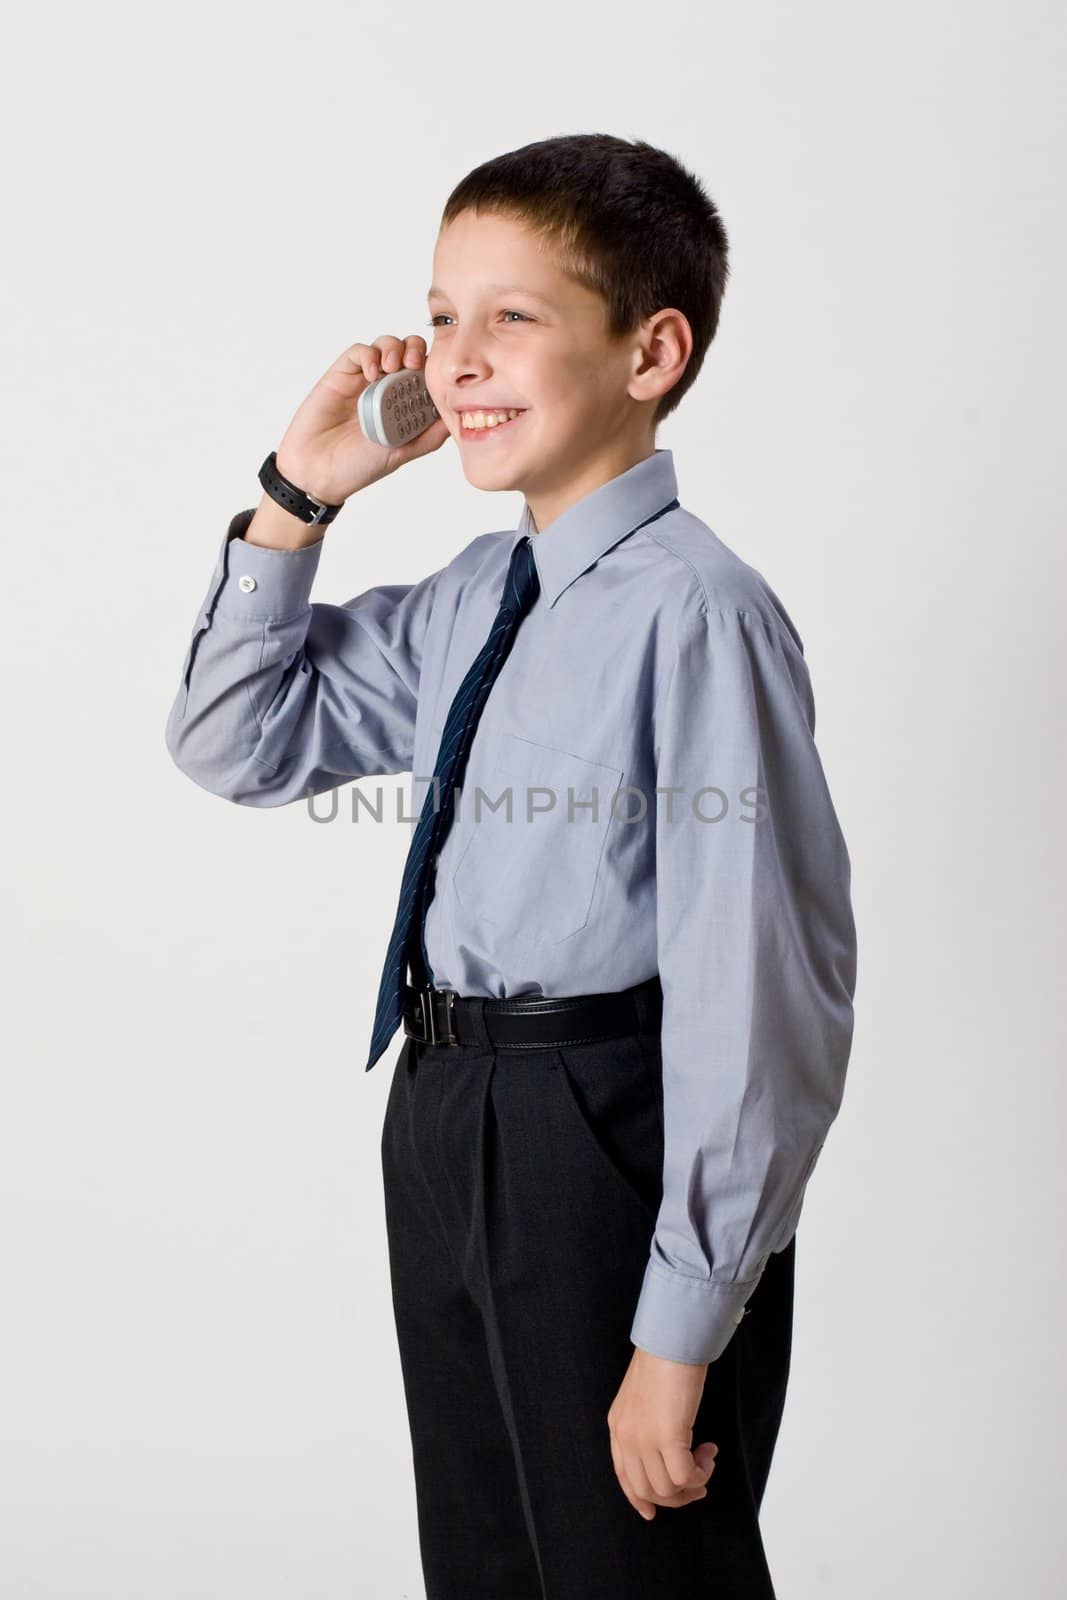 young boy talking by cell phone